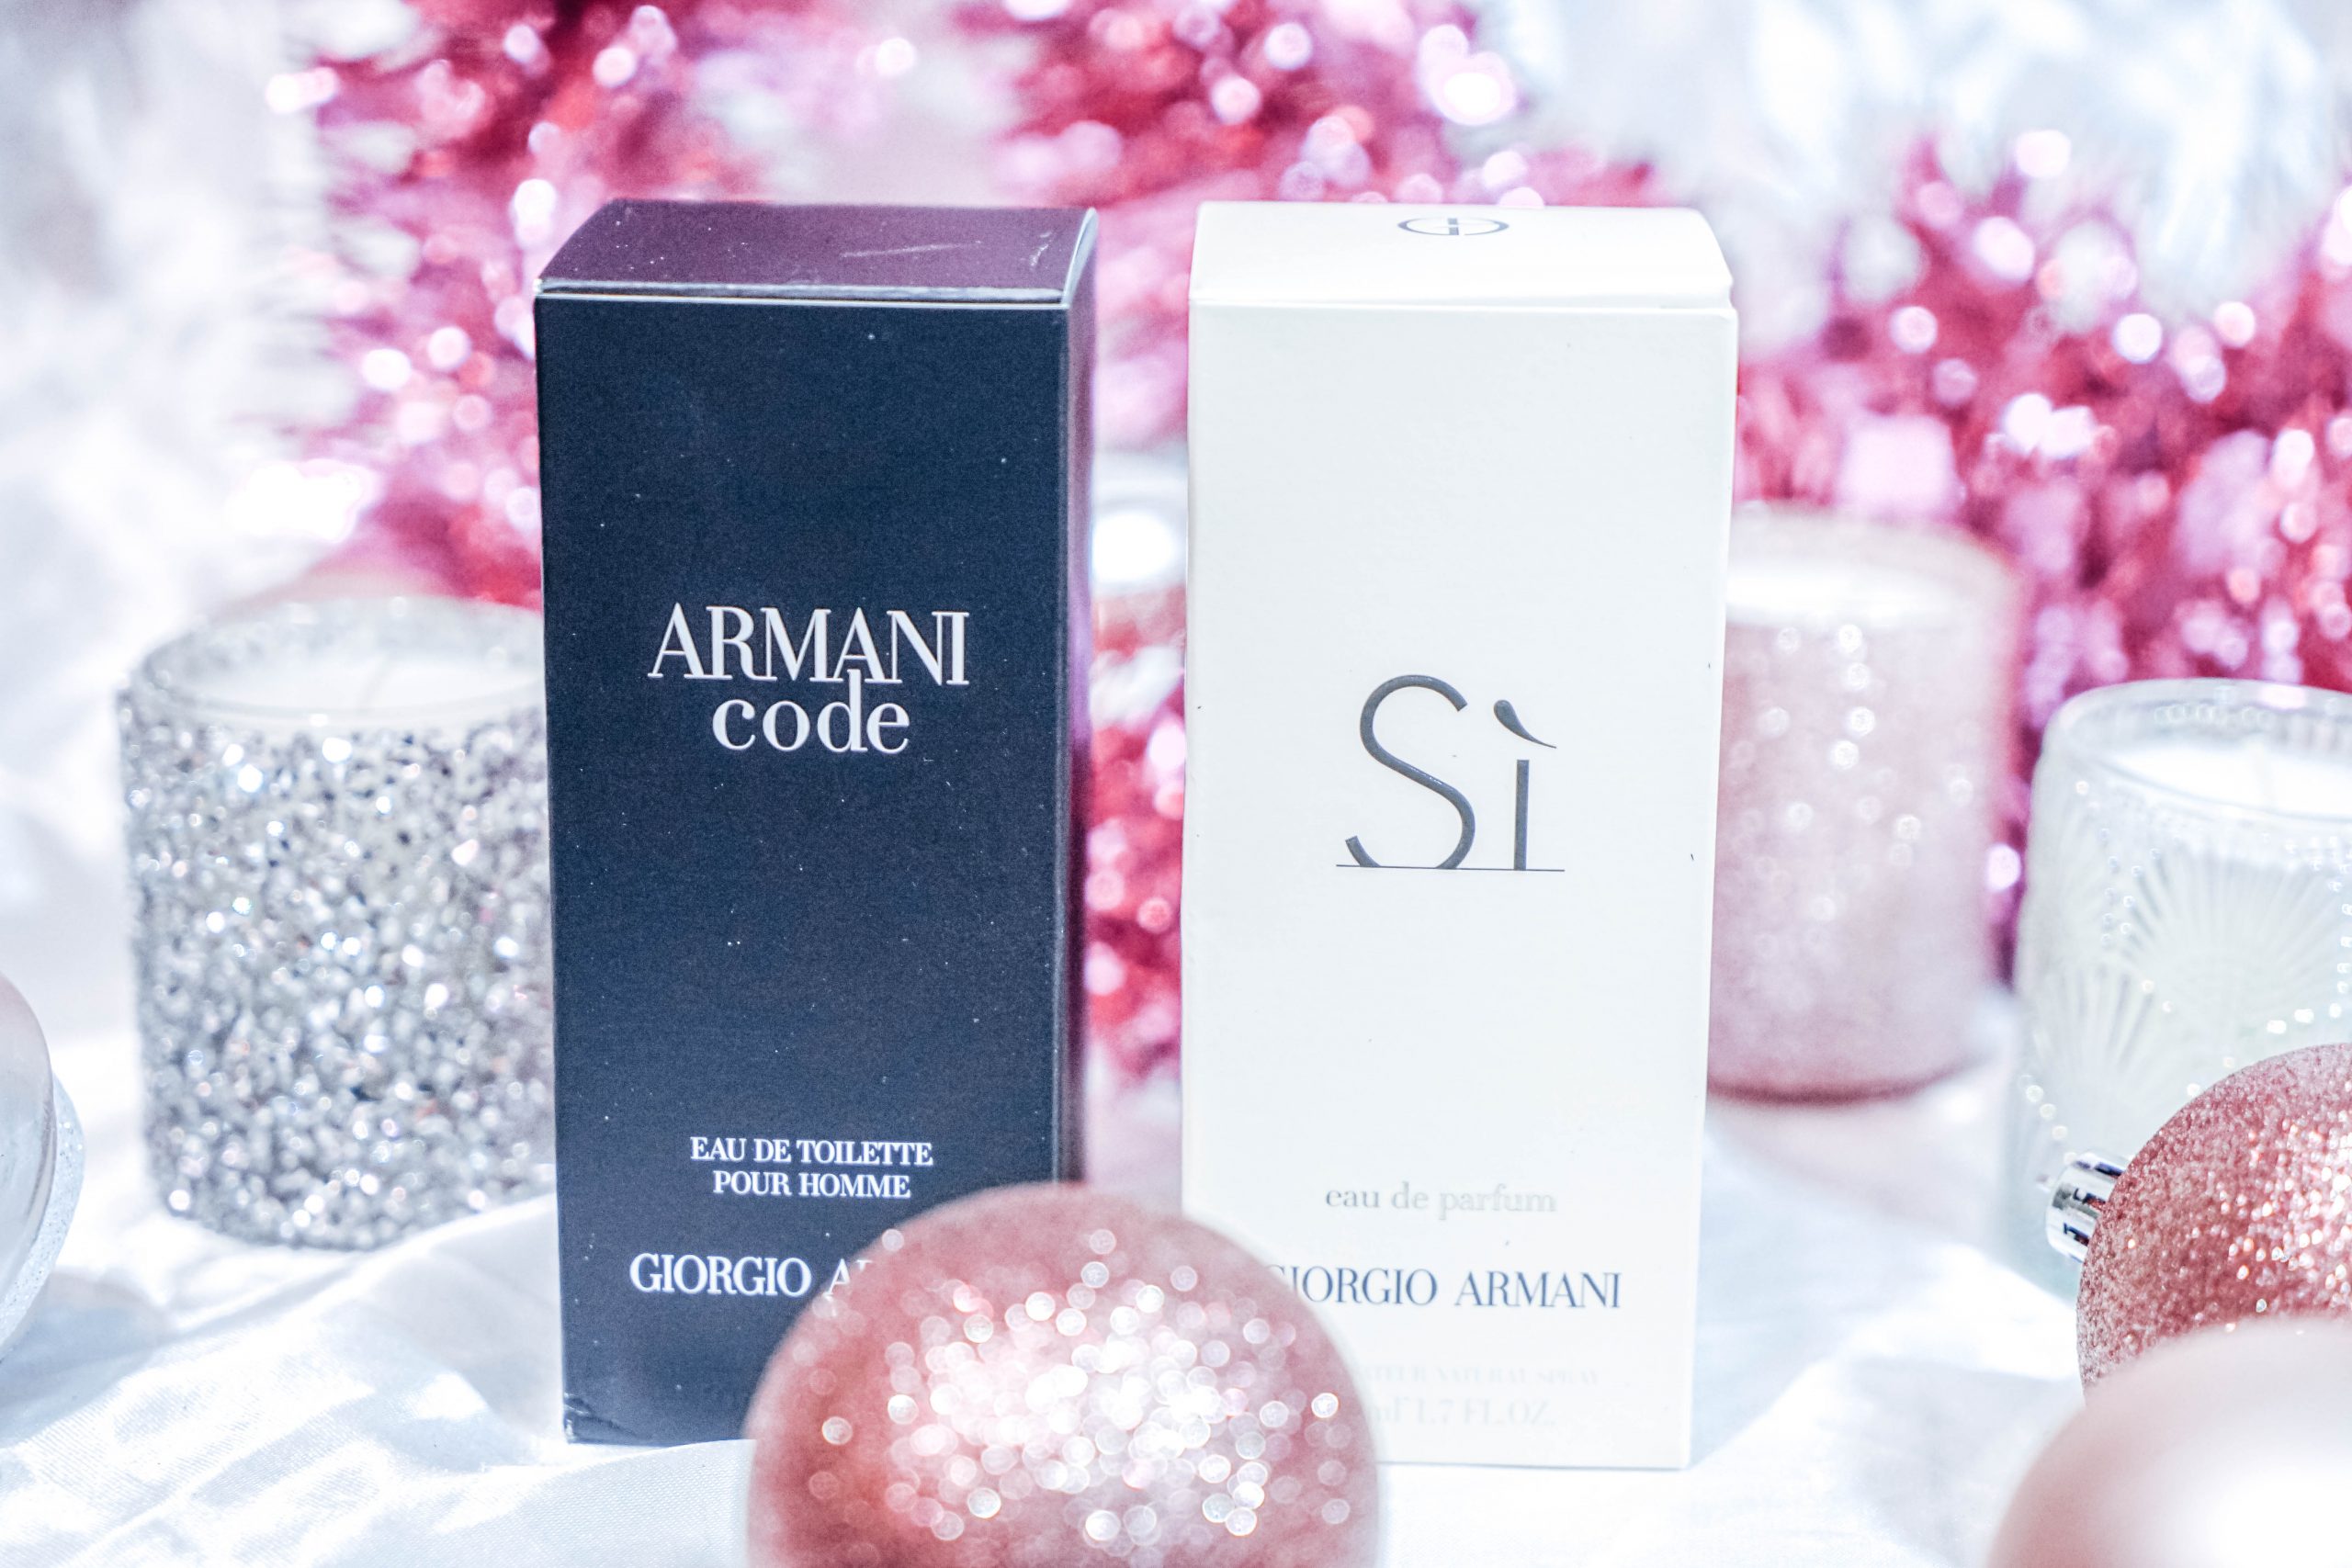 His and Her Fragrances from Armani